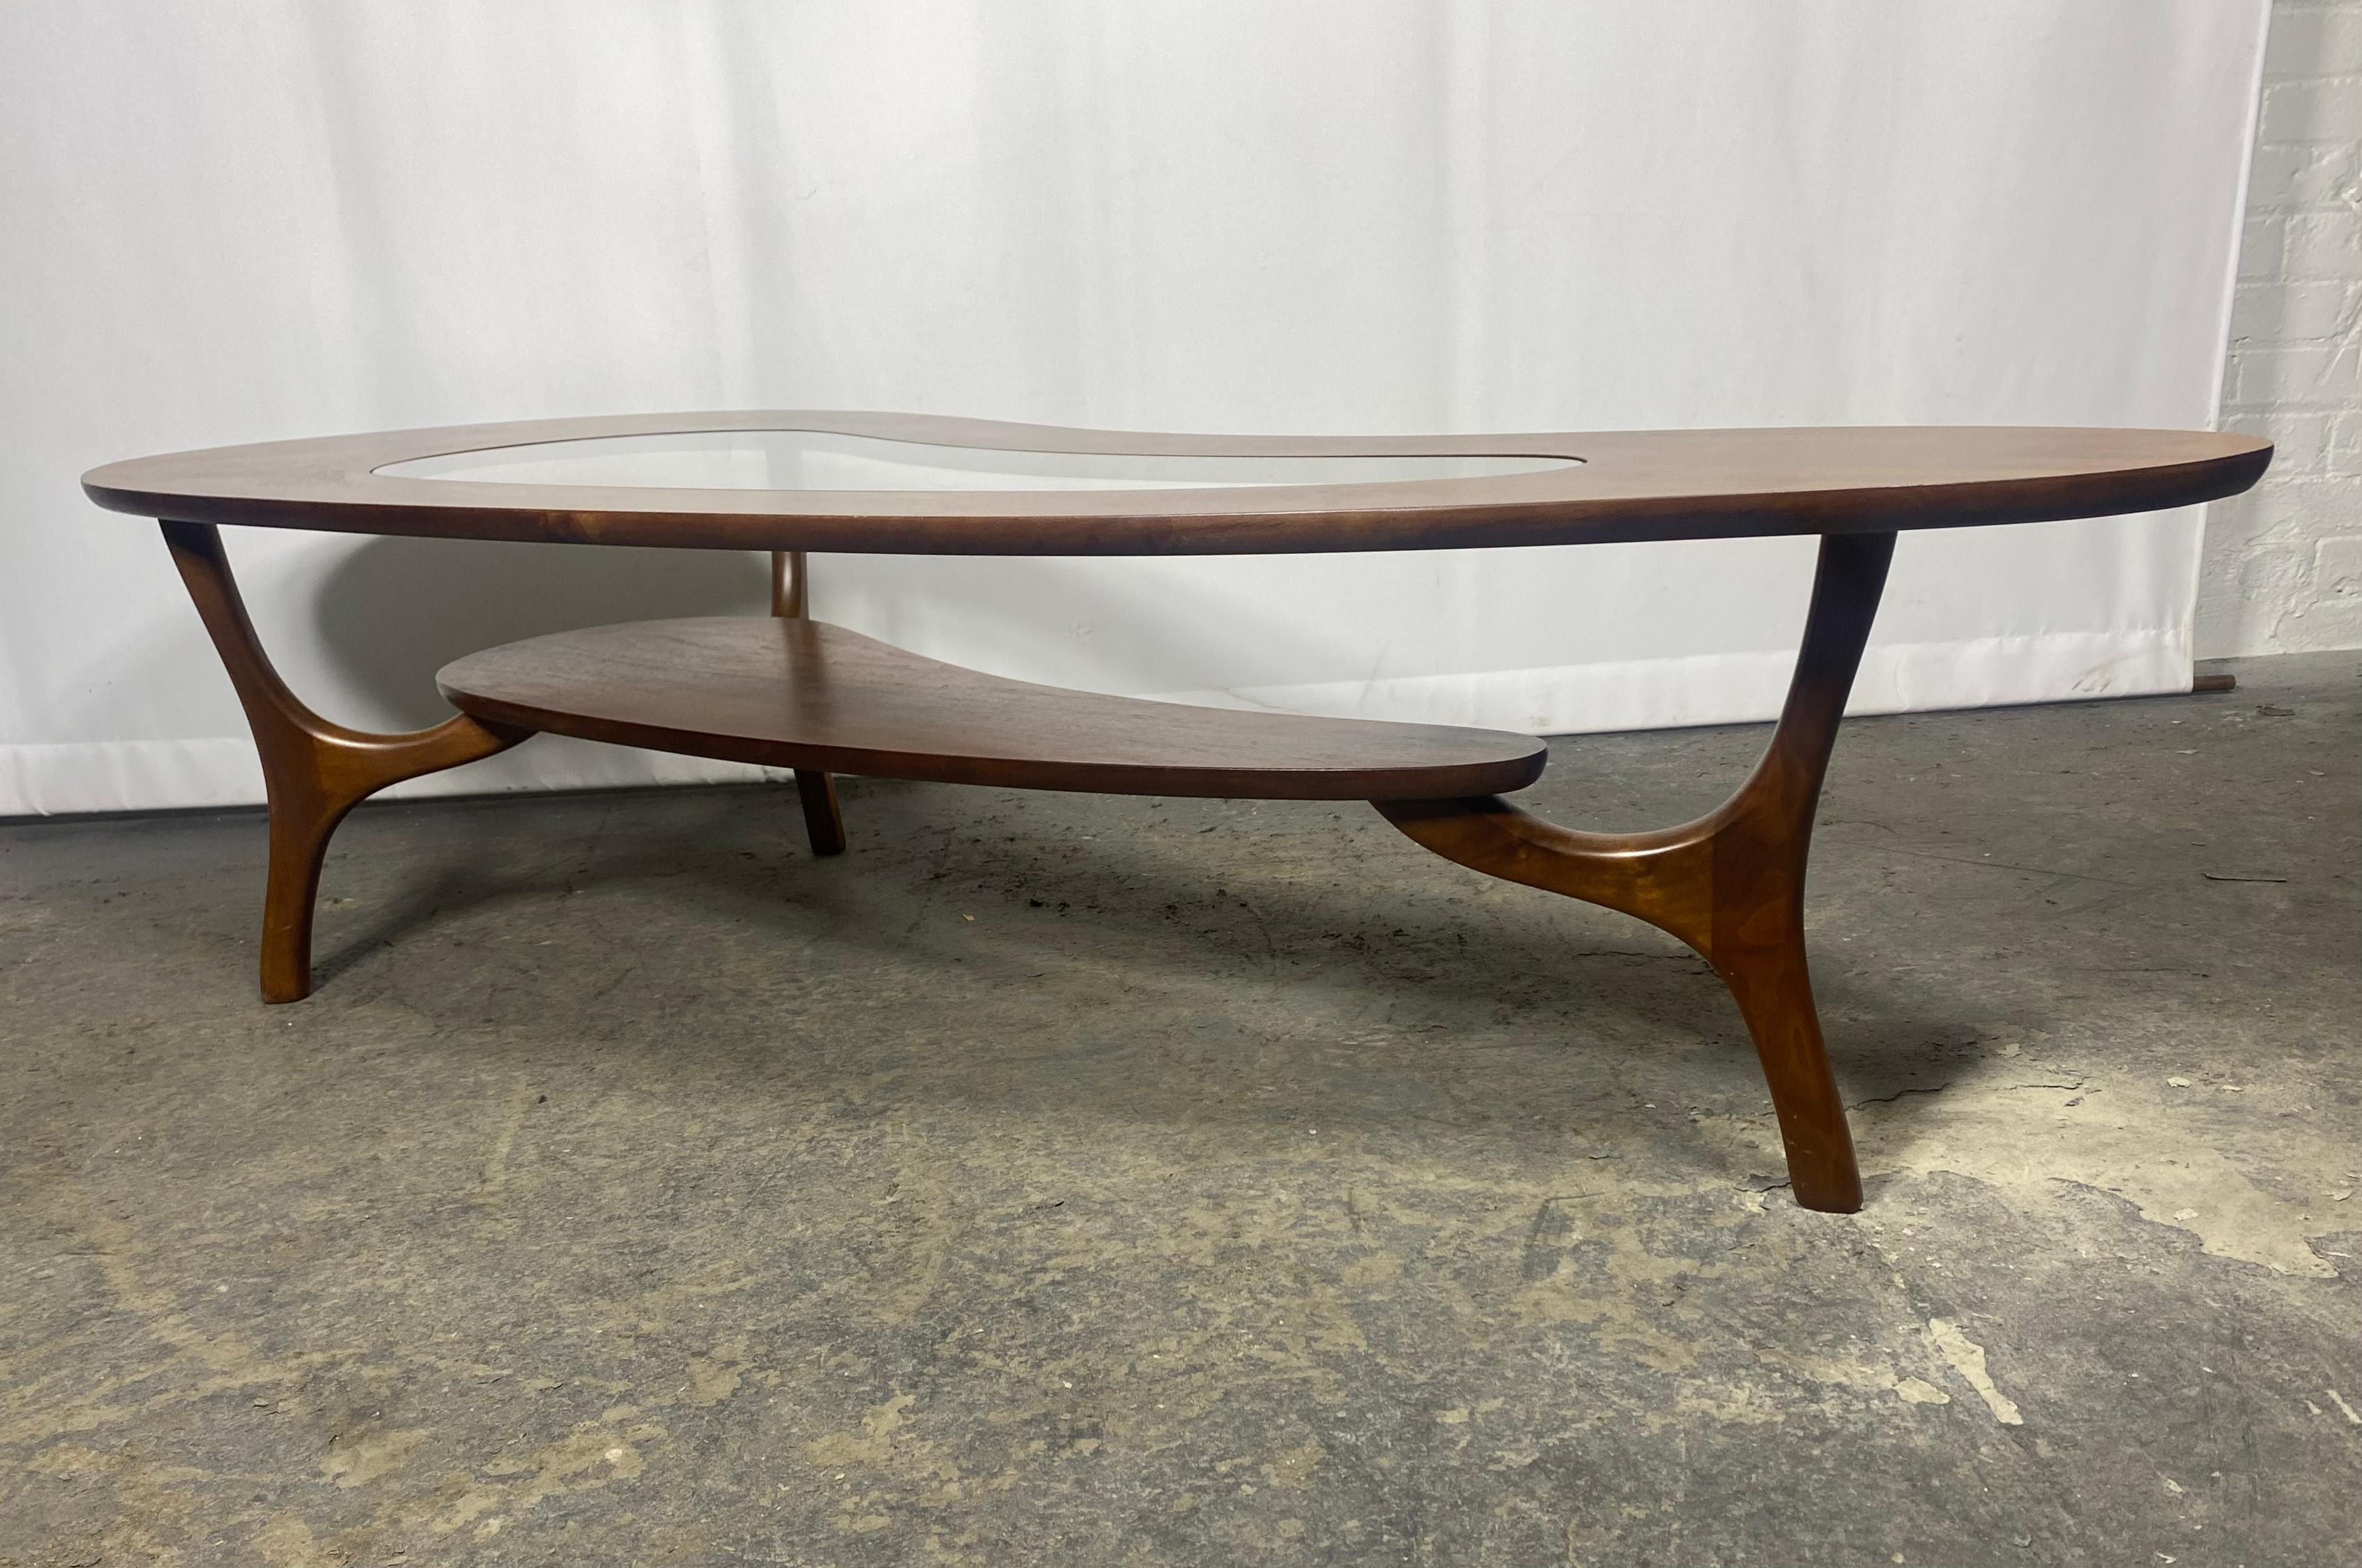 c.1960 kidney shaped, 2 tiered coffee table with sculptural legs & glass insert  For Sale 1